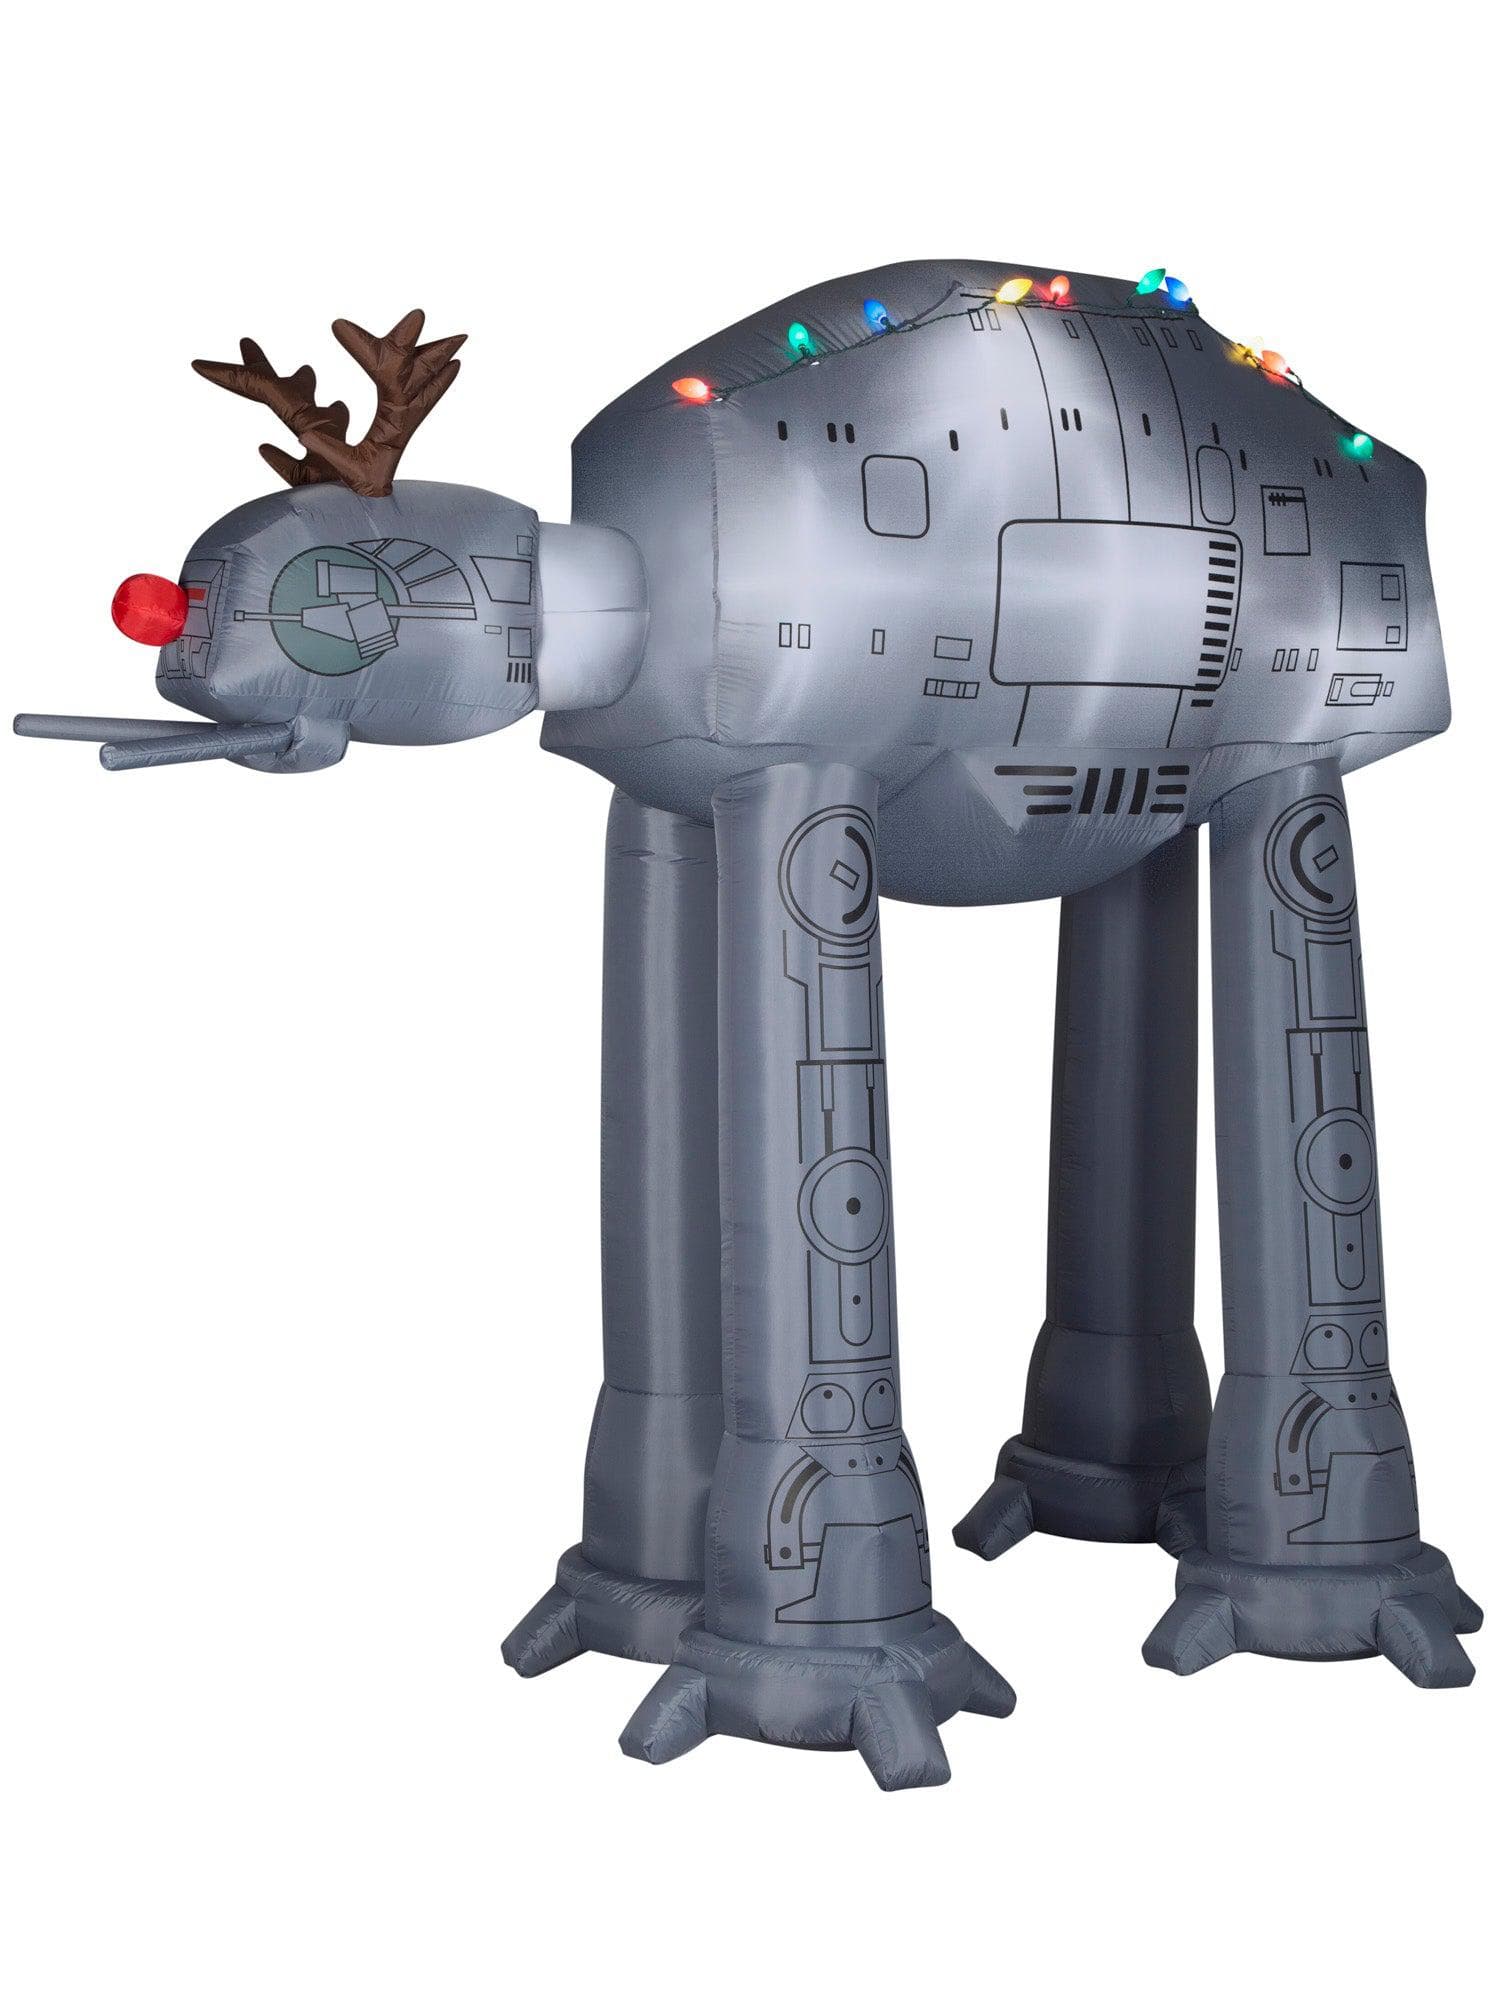 8 Foot Star Wars AT-AT Walker Reindeer Light Up Christmas Inflatable Lawn Decor - costumes.com